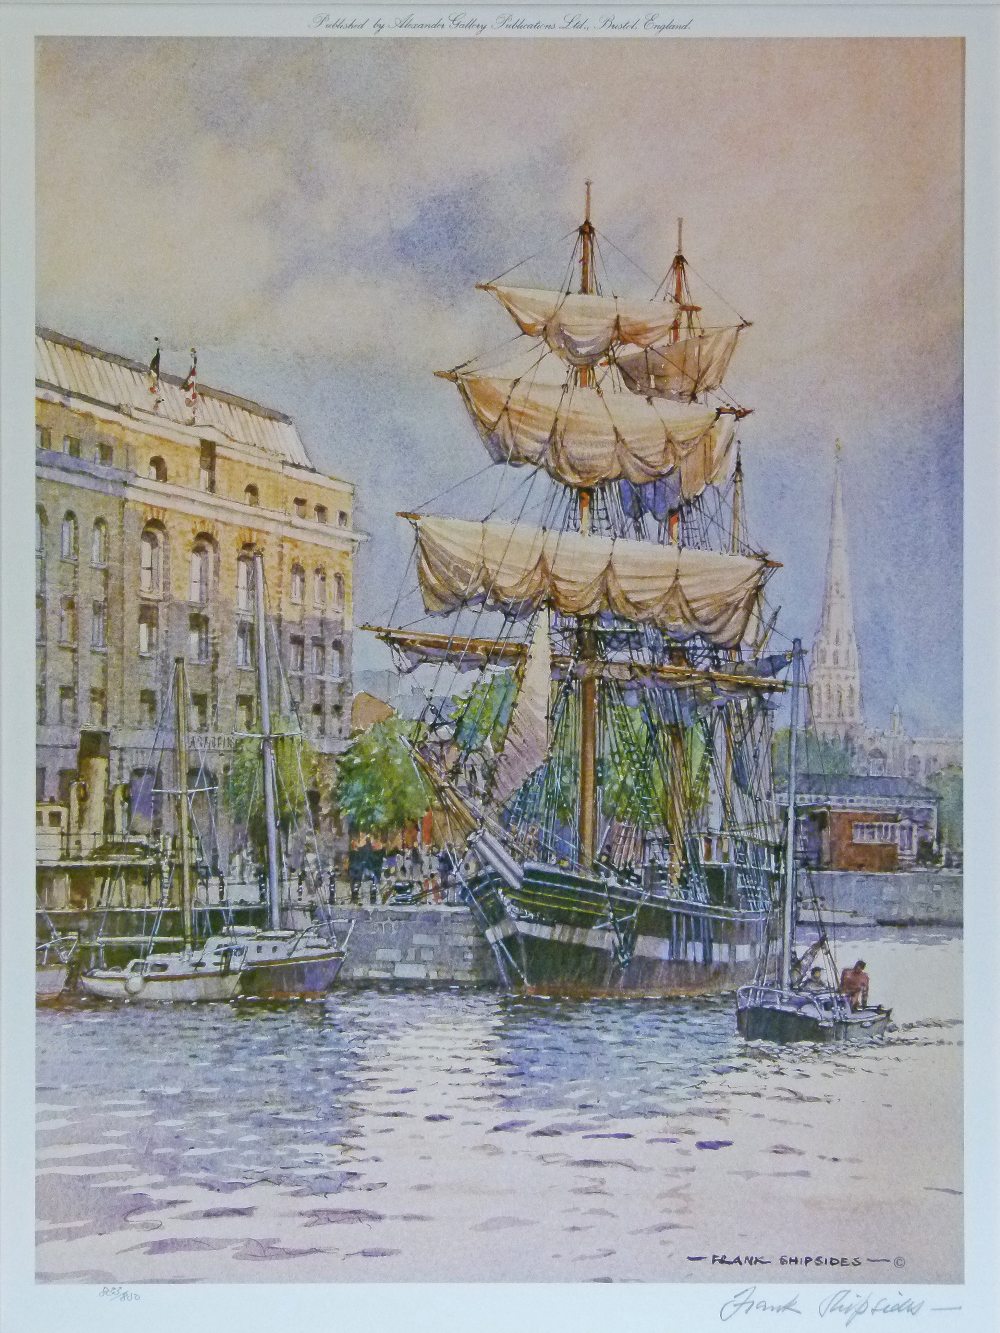 Frank Shipsides (1908-2005)-Signed limited edition print-Waterfront, being a Bristol harbour scene